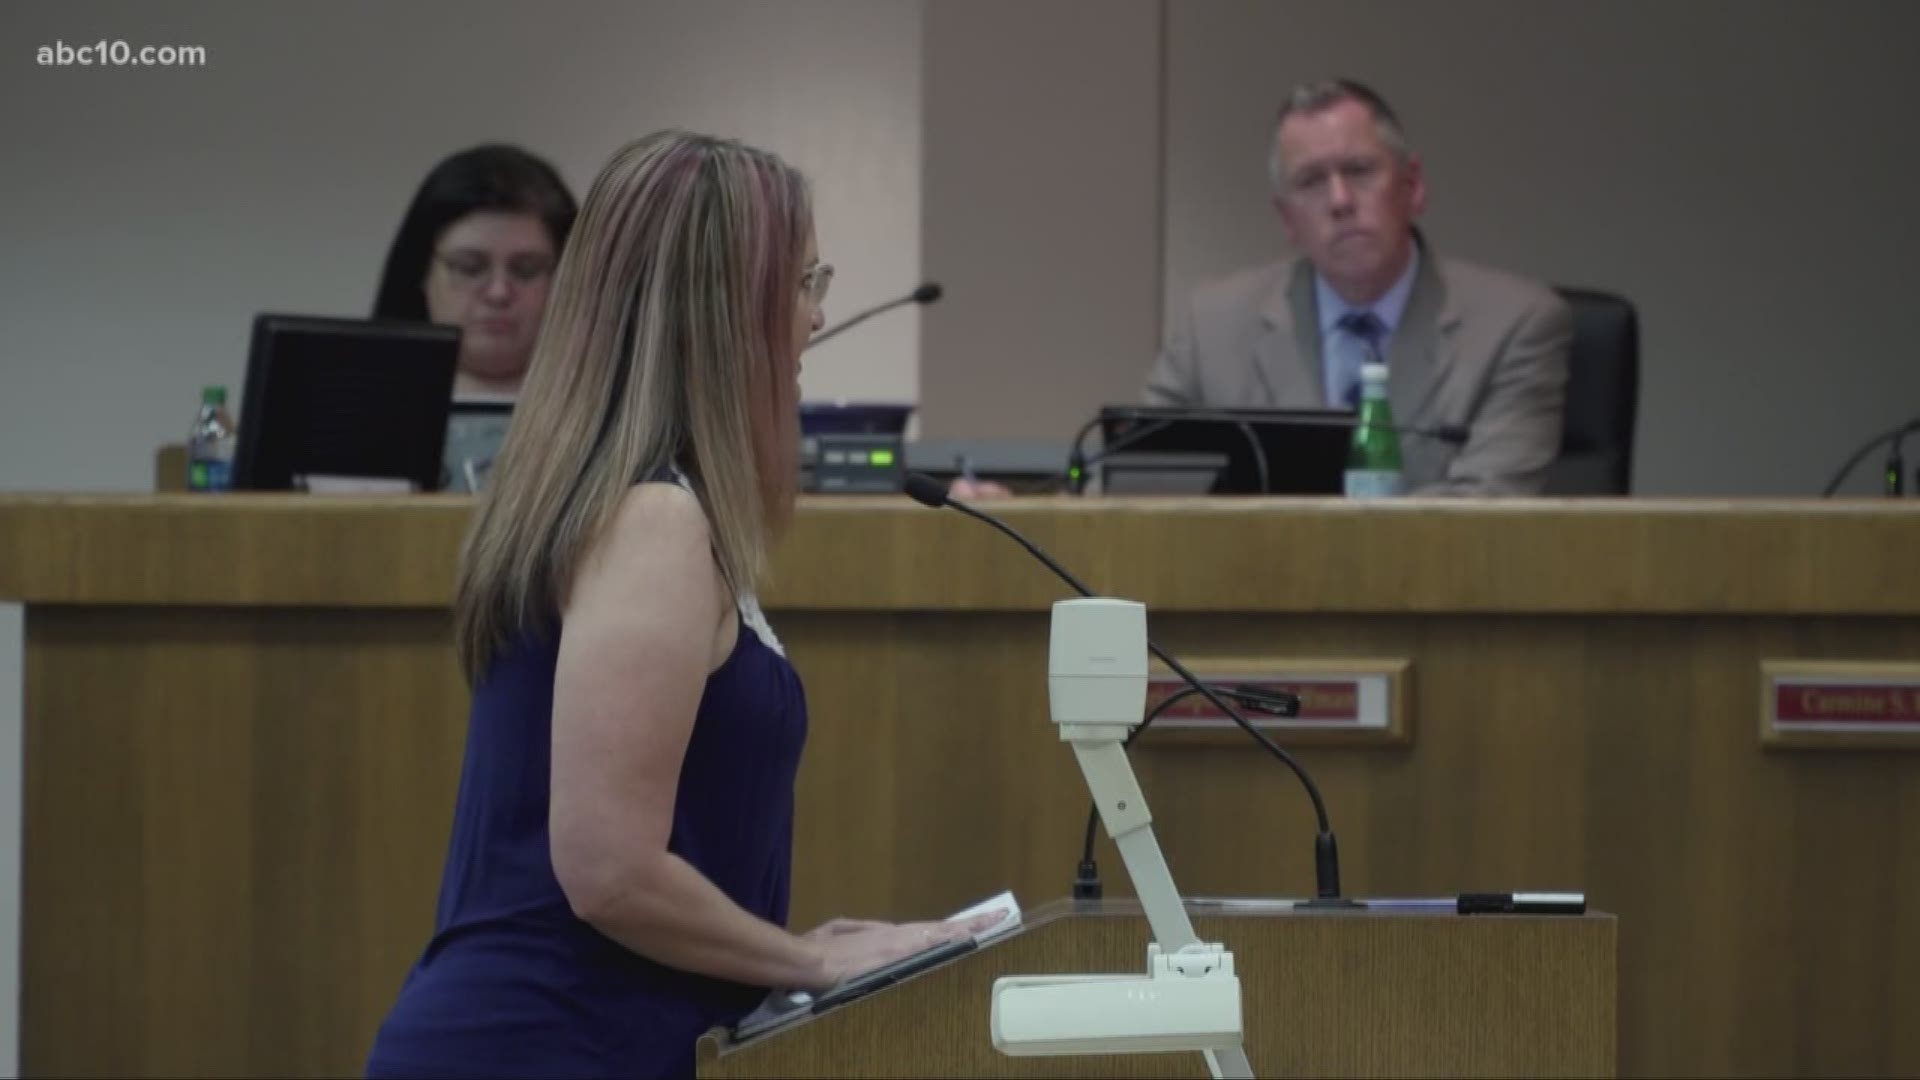 Elk Grove's "anti-bullying mom" addressed the school board, Tuesday night, on National Bullying Awareness Month.